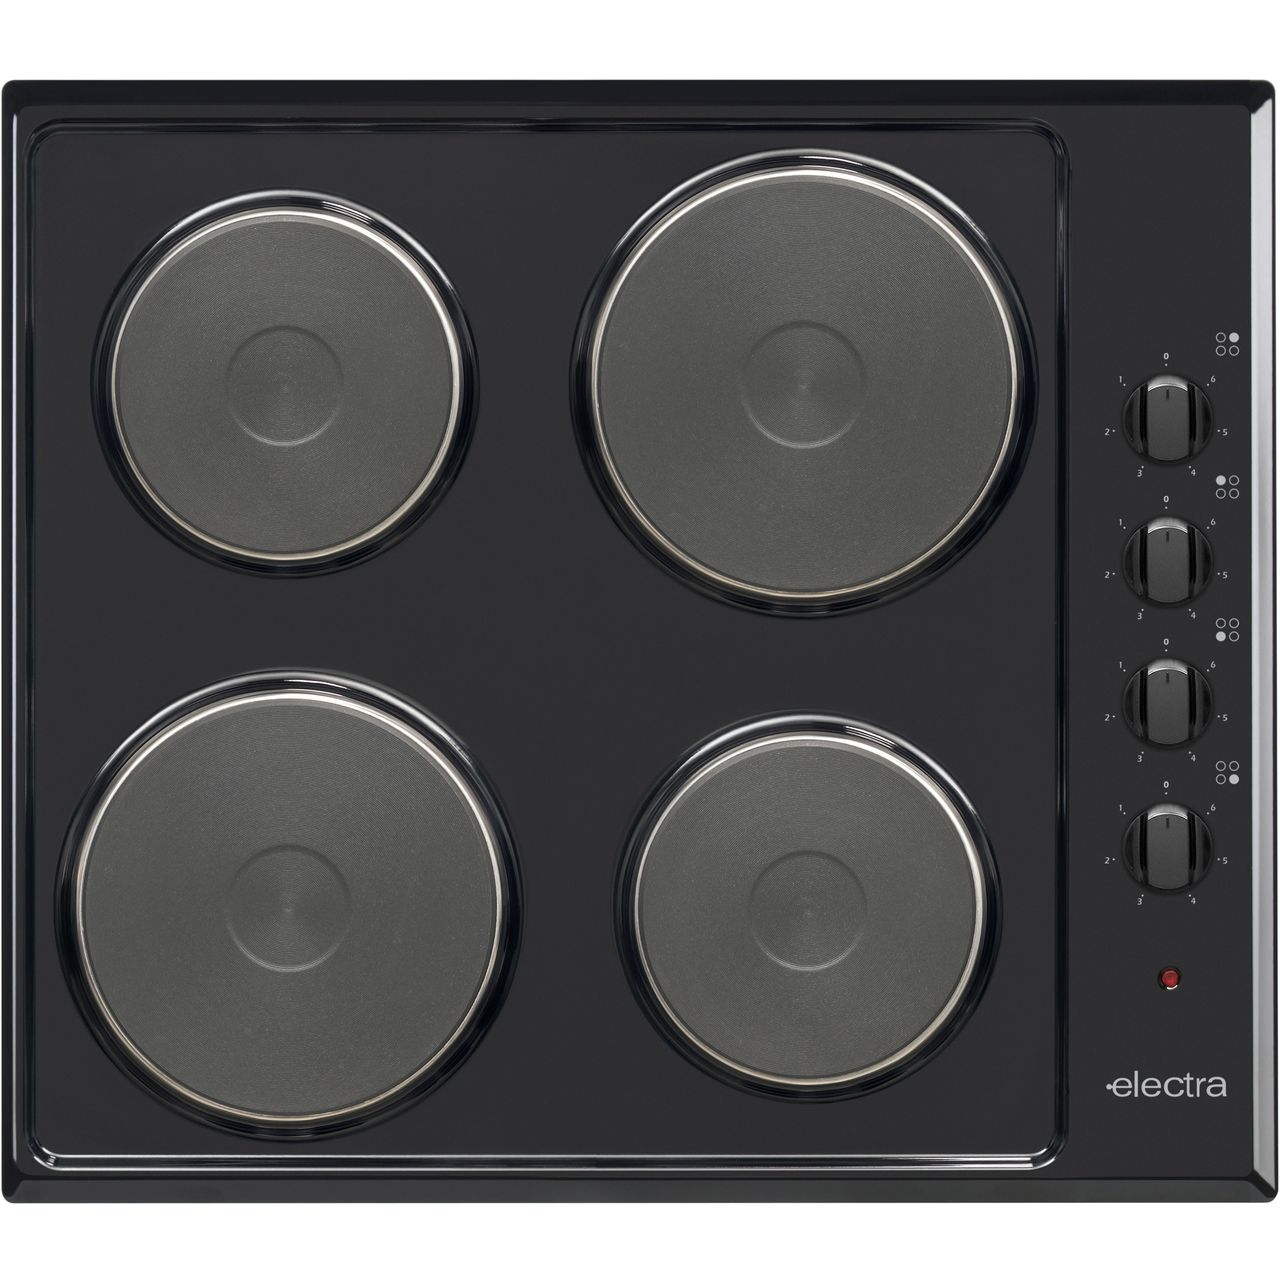 Electra BISH4B 58cm Solid Plate Hob Review